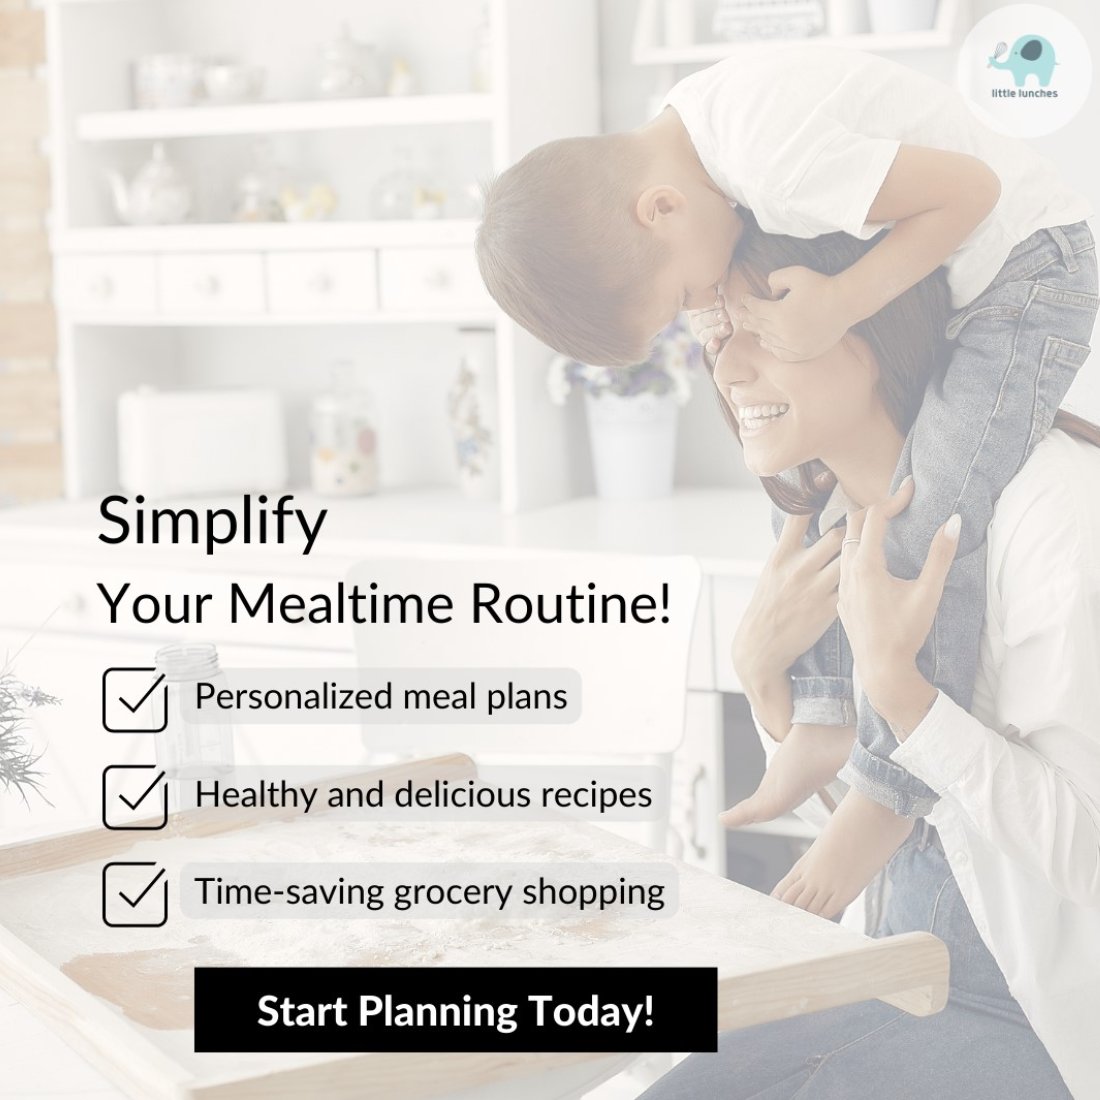 Discover #nutritiousrecipes that simplify #mealplanning and streamline grocery shopping! Enjoy #deliciousmeals without the hassle! Download Little Lunches today: shorturl.at/iuvx7